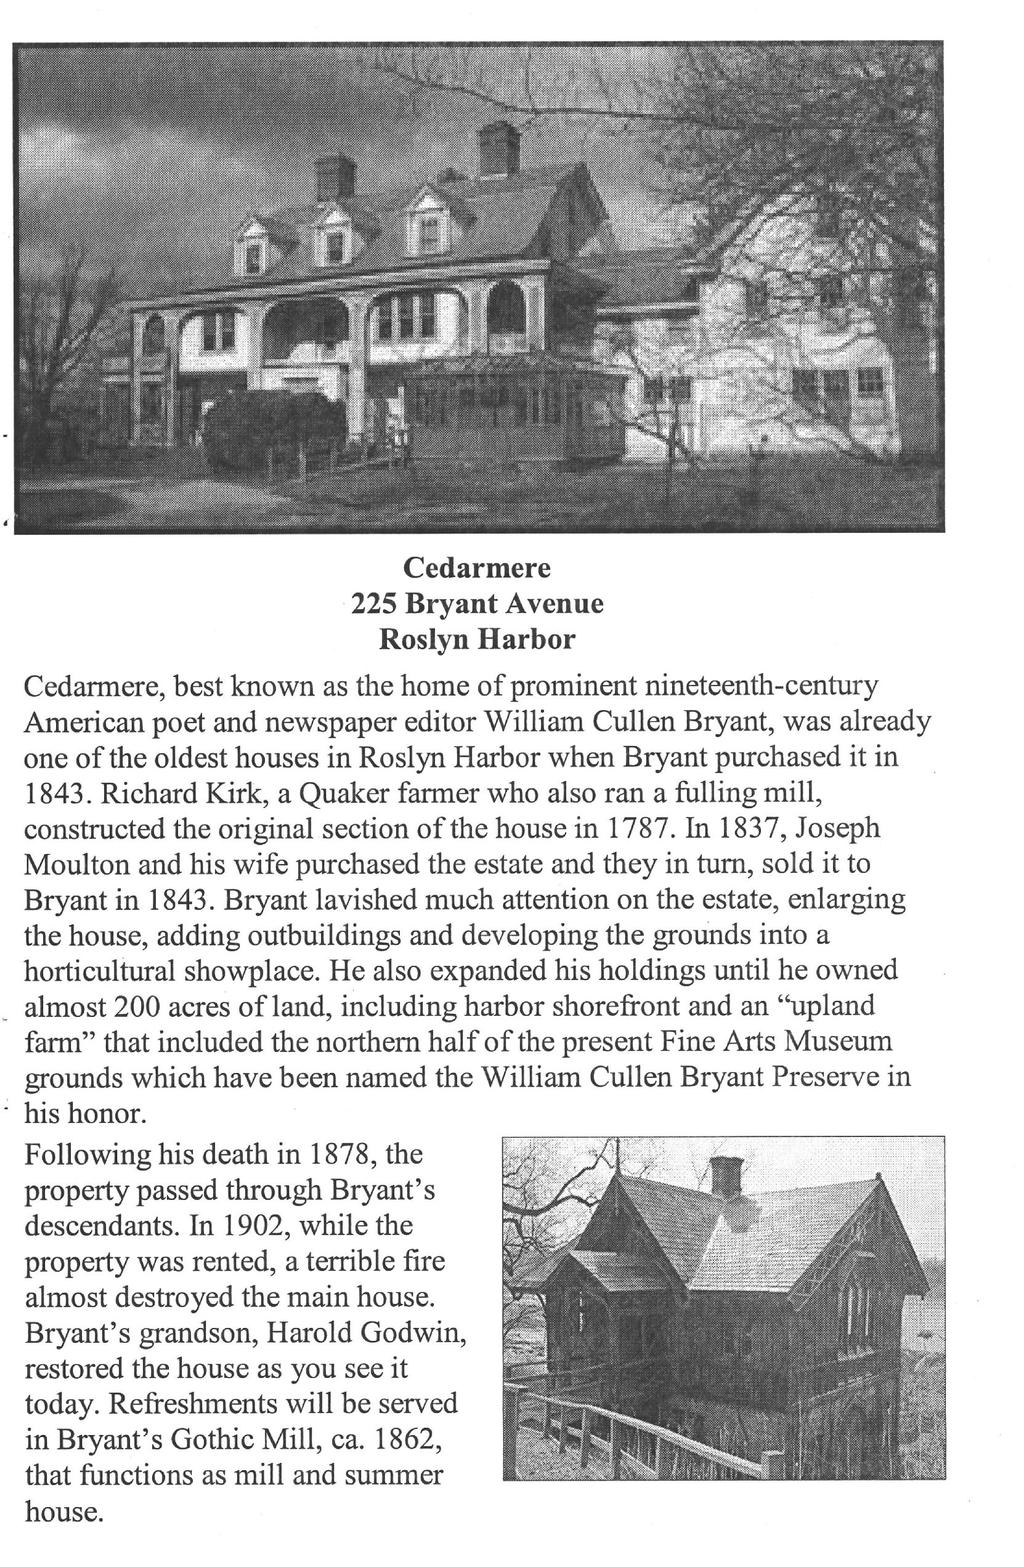 Cedarmere 225 Bryant Avenue Roslyn Harbor Cedarmere, best known as the home of prominent nineteenth-century American poet and newspaper editor William Cullen Bryant, was already one of the oldest